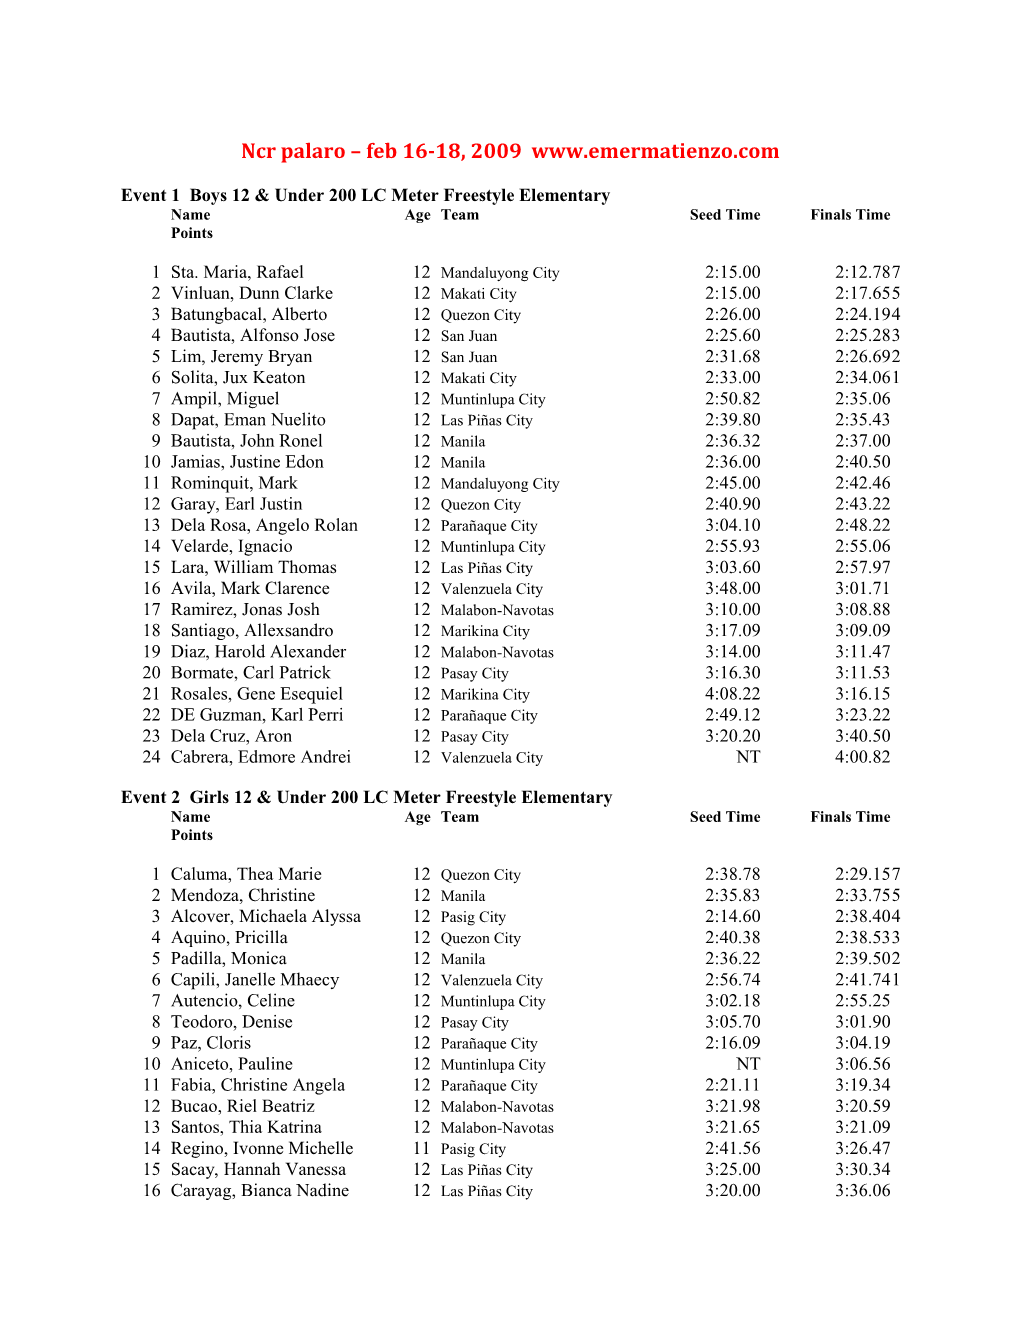 Event 1 Boys 12 & Under 200 LC Meter Freestyle Elementary